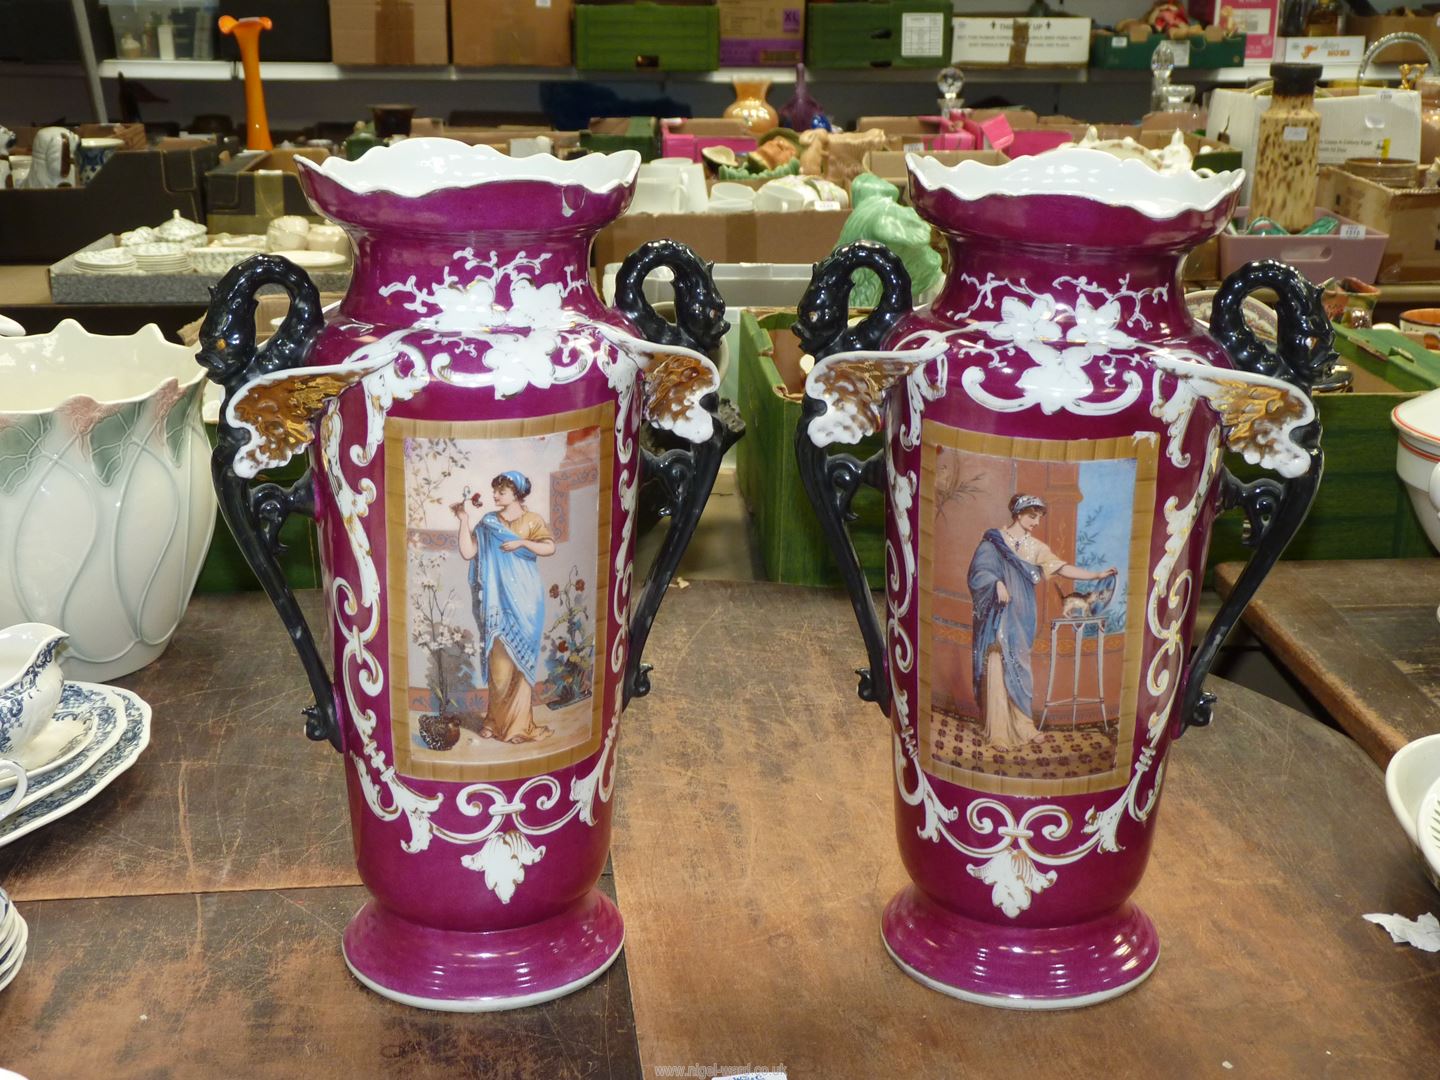 Two large Grecian style vases, 18" tall (one with repair to rim).